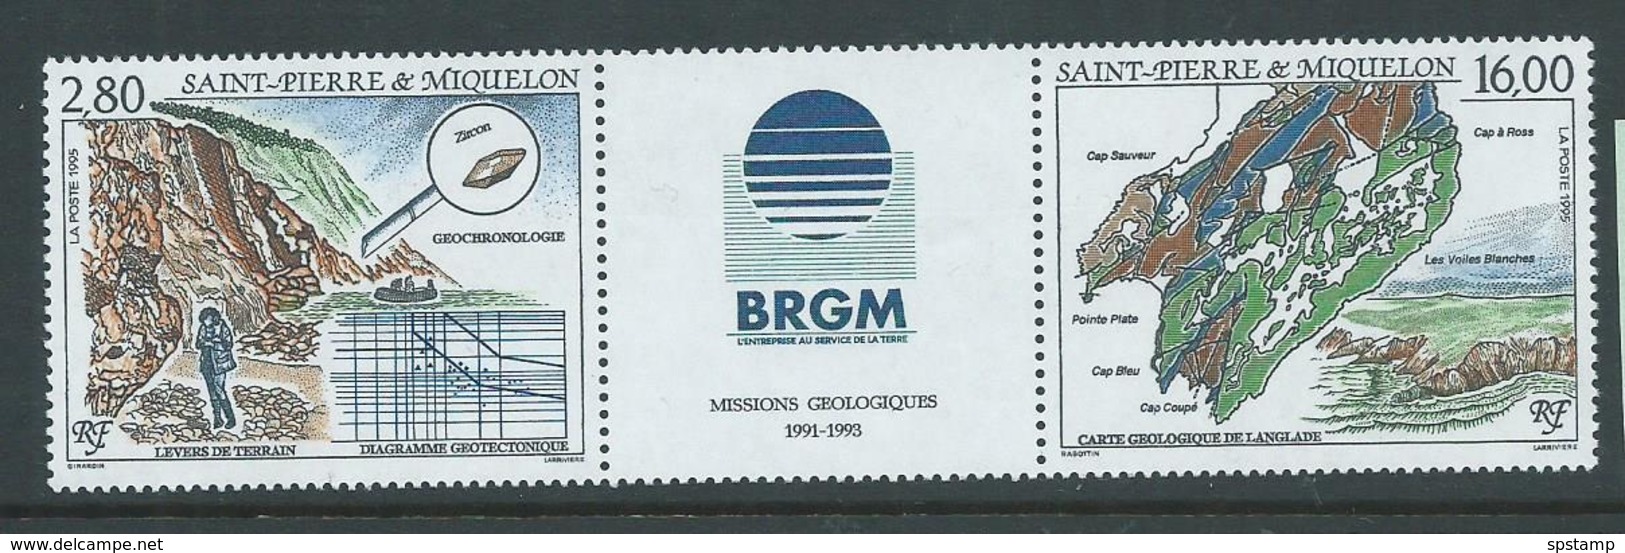 St Pierre & Miquelon 1995 Geological Mission Strip With Central Label MNH - Unused Stamps